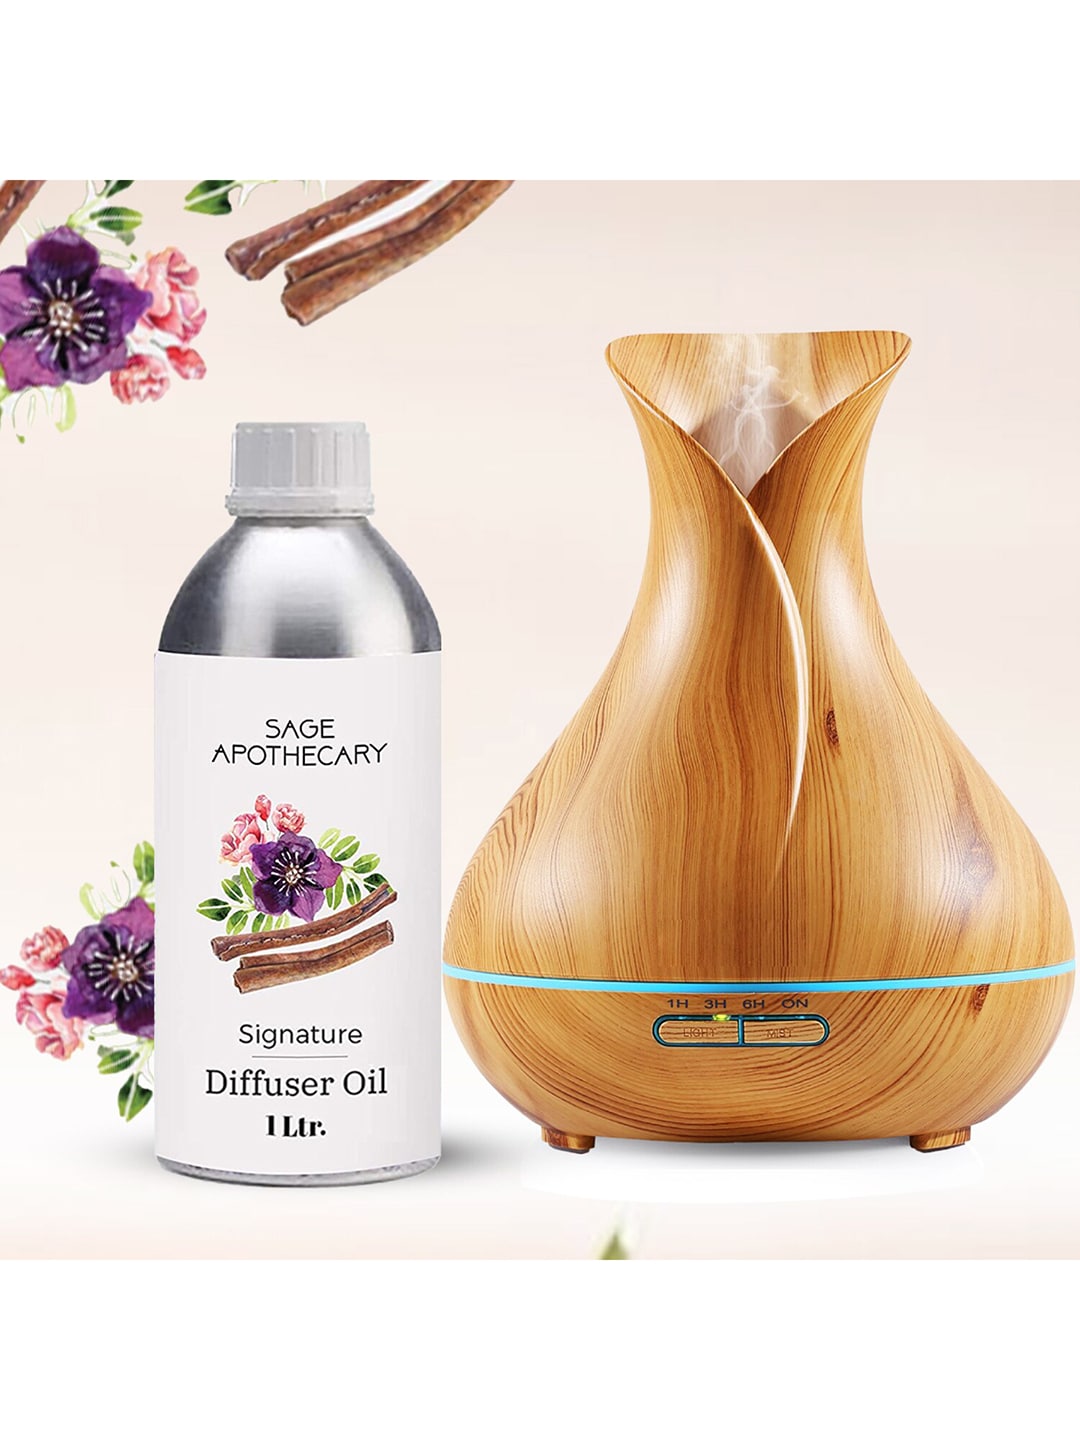 SAGE APOTHECARY Signature Diffuser Oil for Anxiety Free Sleep - 1 Litre Price in India